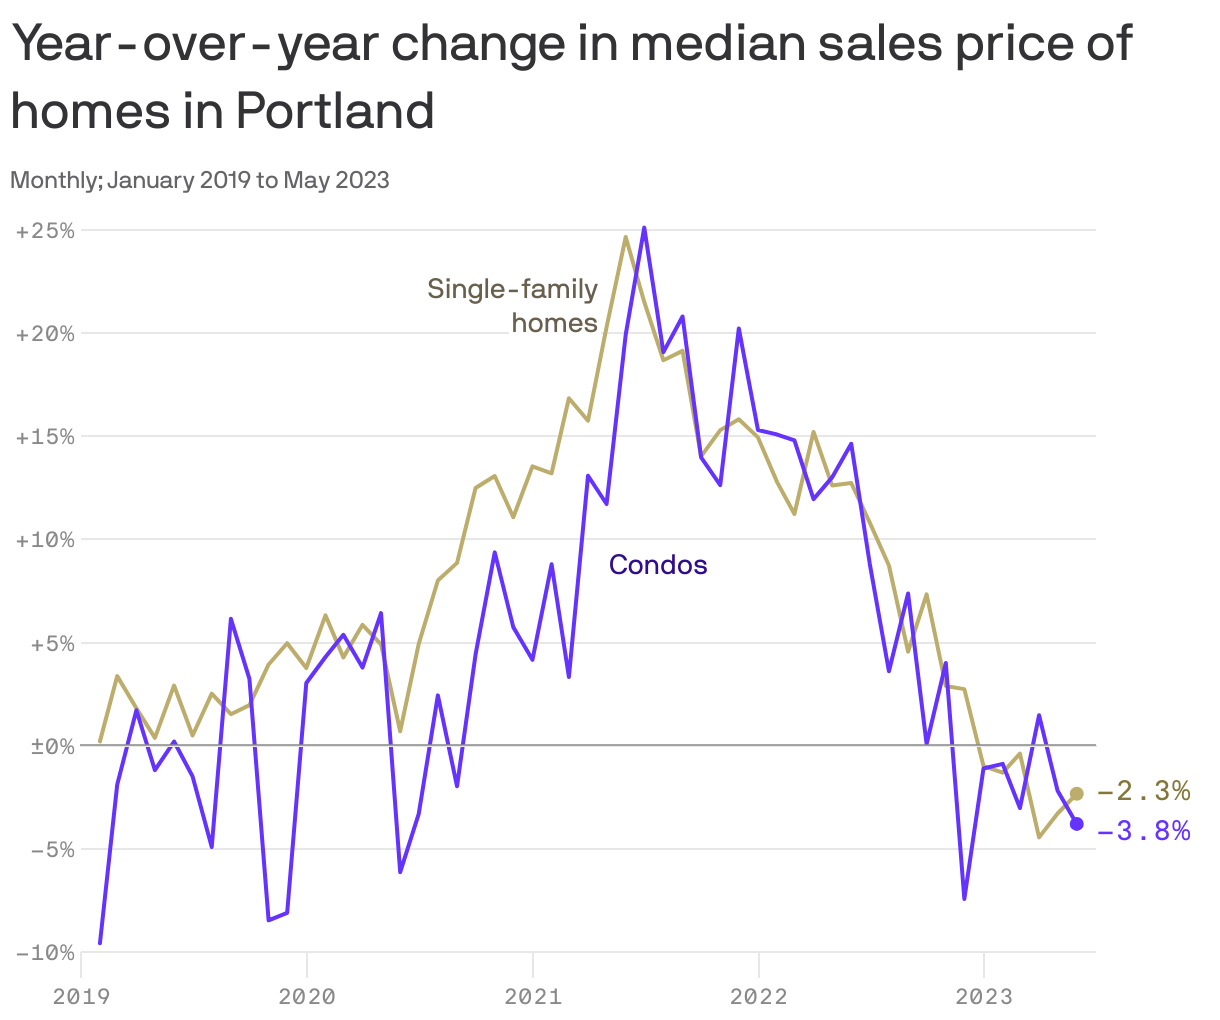 Year-over-year change in median sales price of homes in Portland